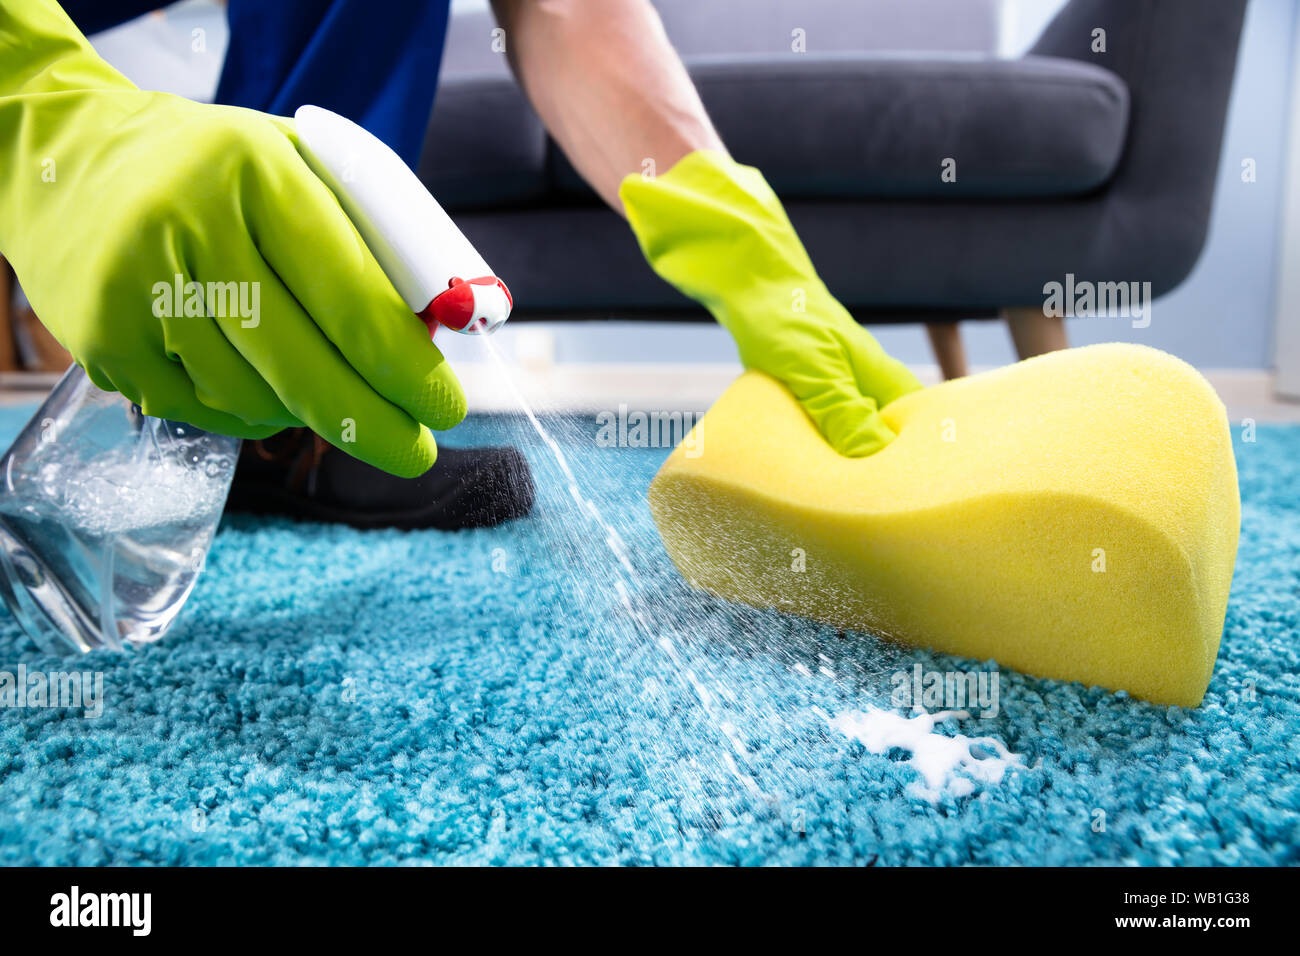 Cropped Hands Cleaning Rug With Soap Foam At Home Stock Photo